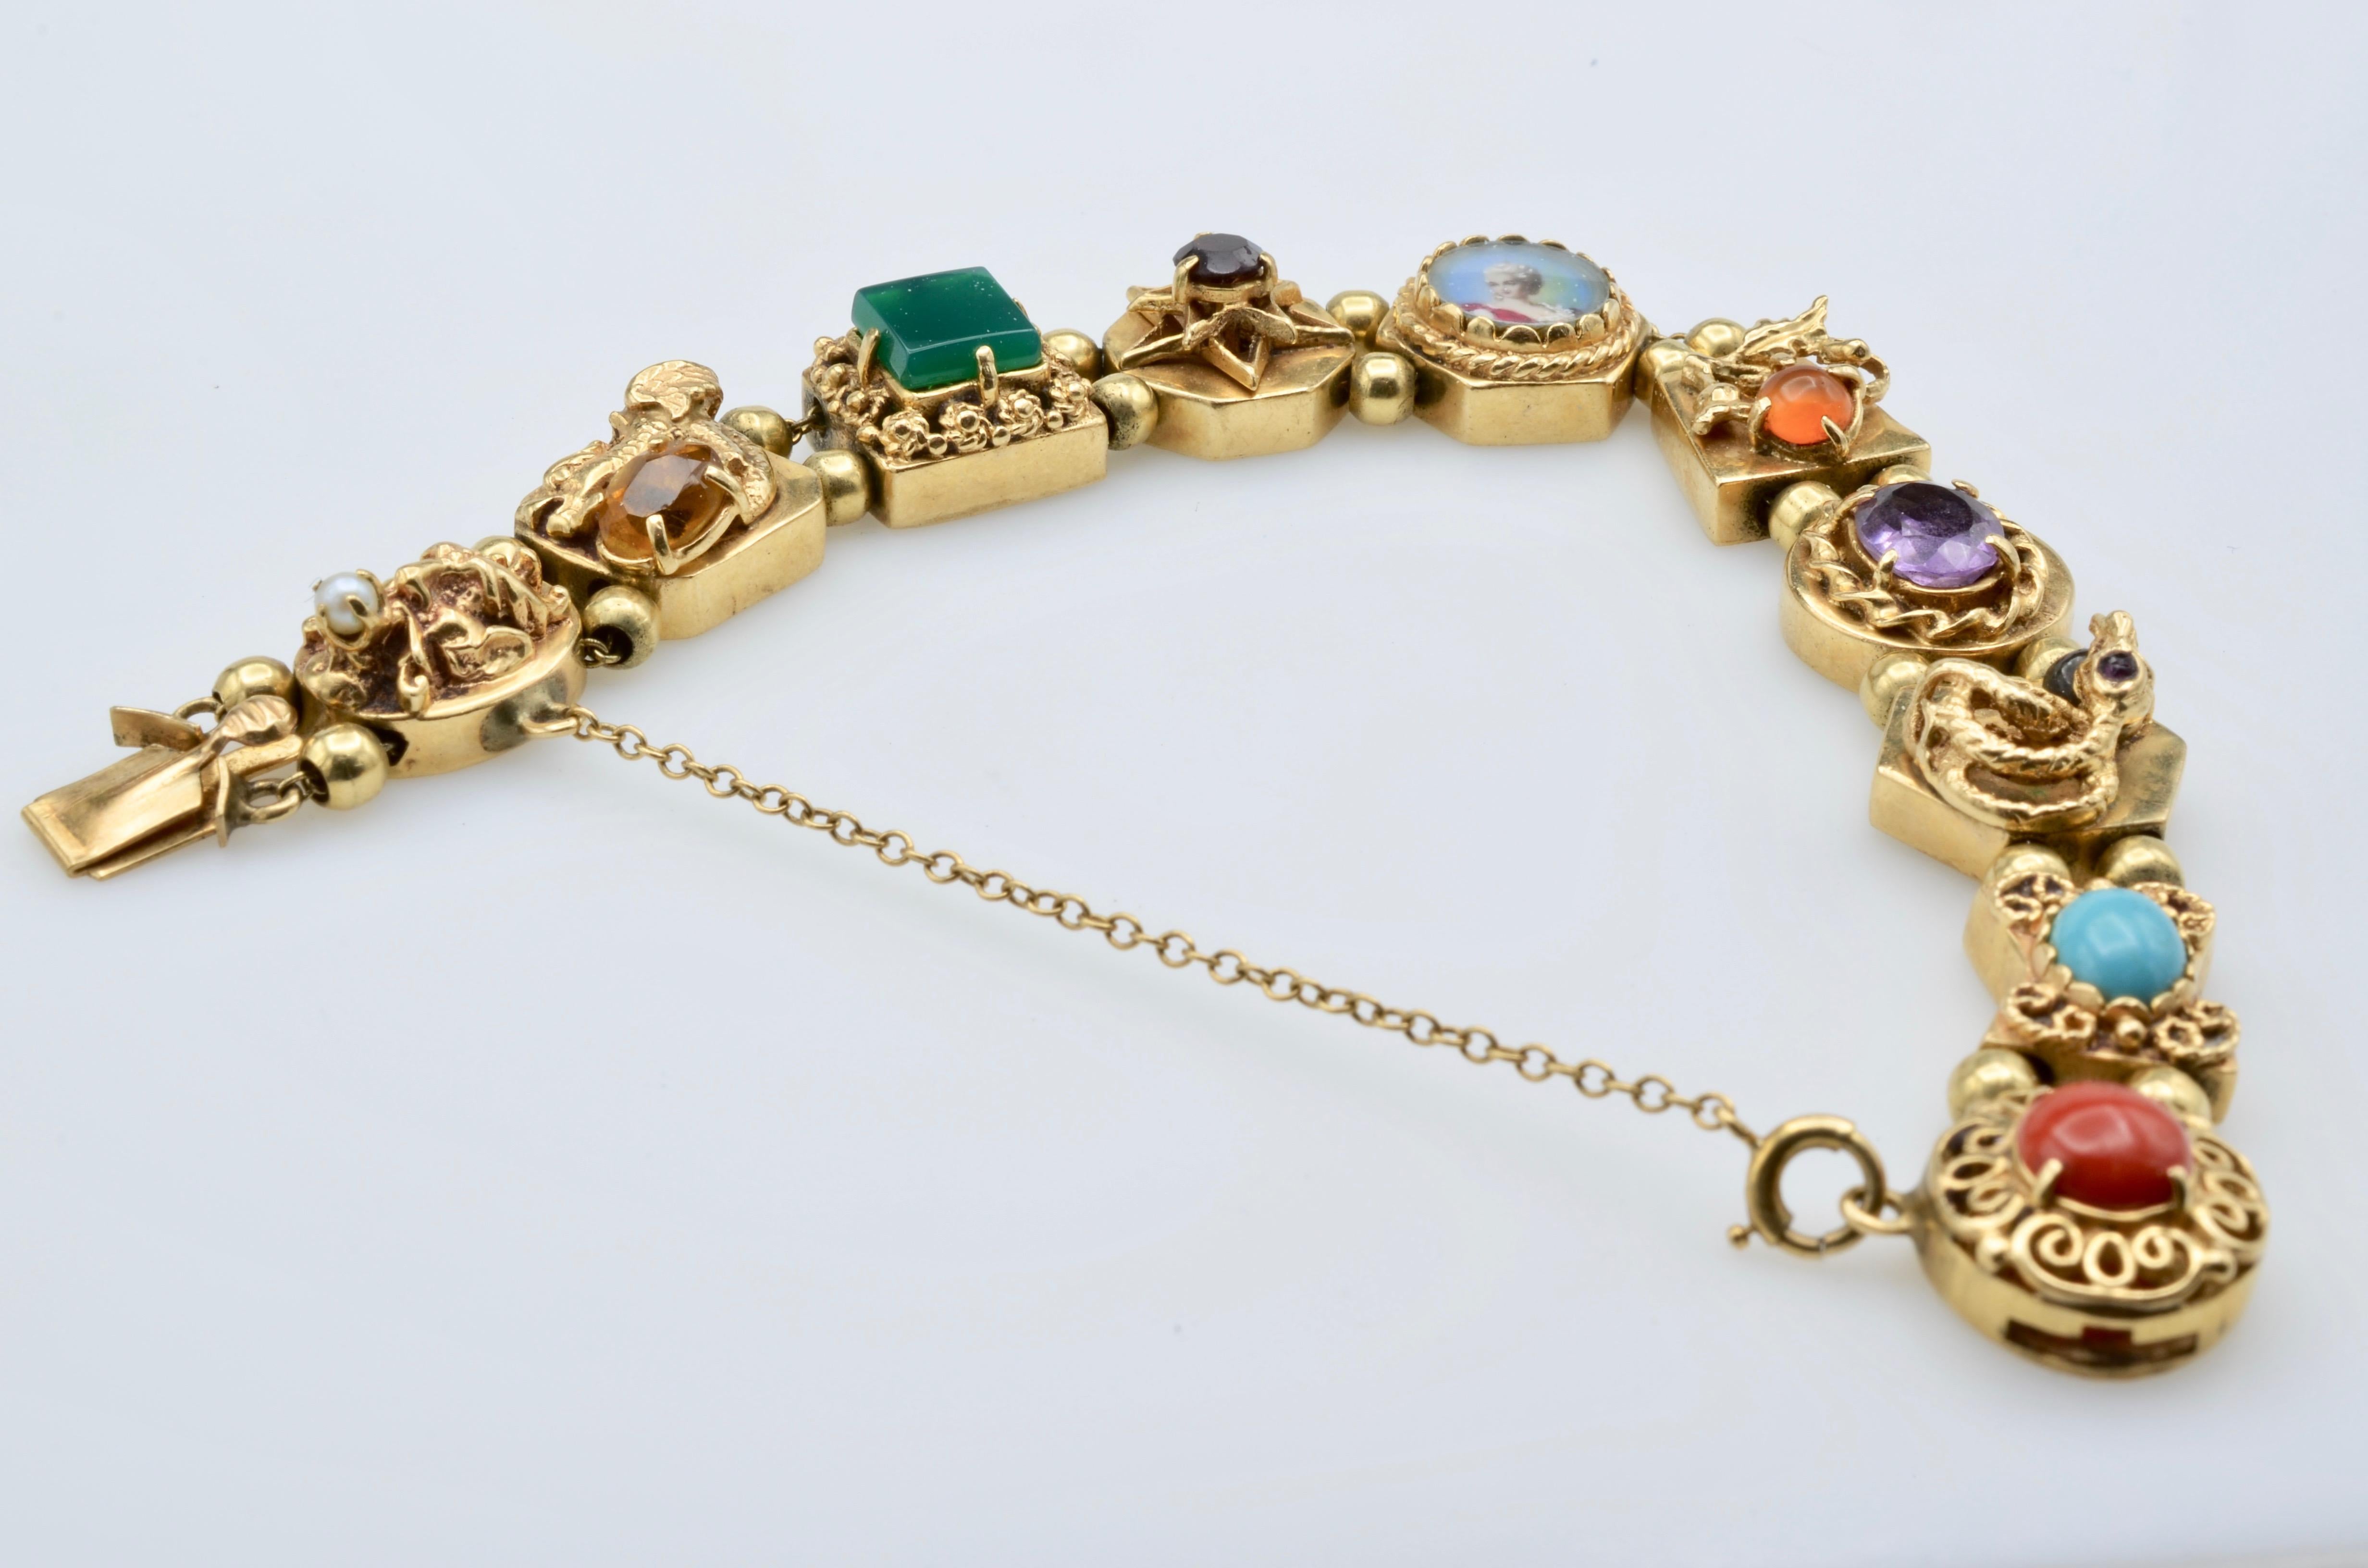 This stunning slider bracelet is a collection of semi precious stones set in unusual carvings of snake, a dragon and a menagerie of filigree carvings.They all slide on two tandem 14k gold chains. The clasp has a safety chain. You will not tire of